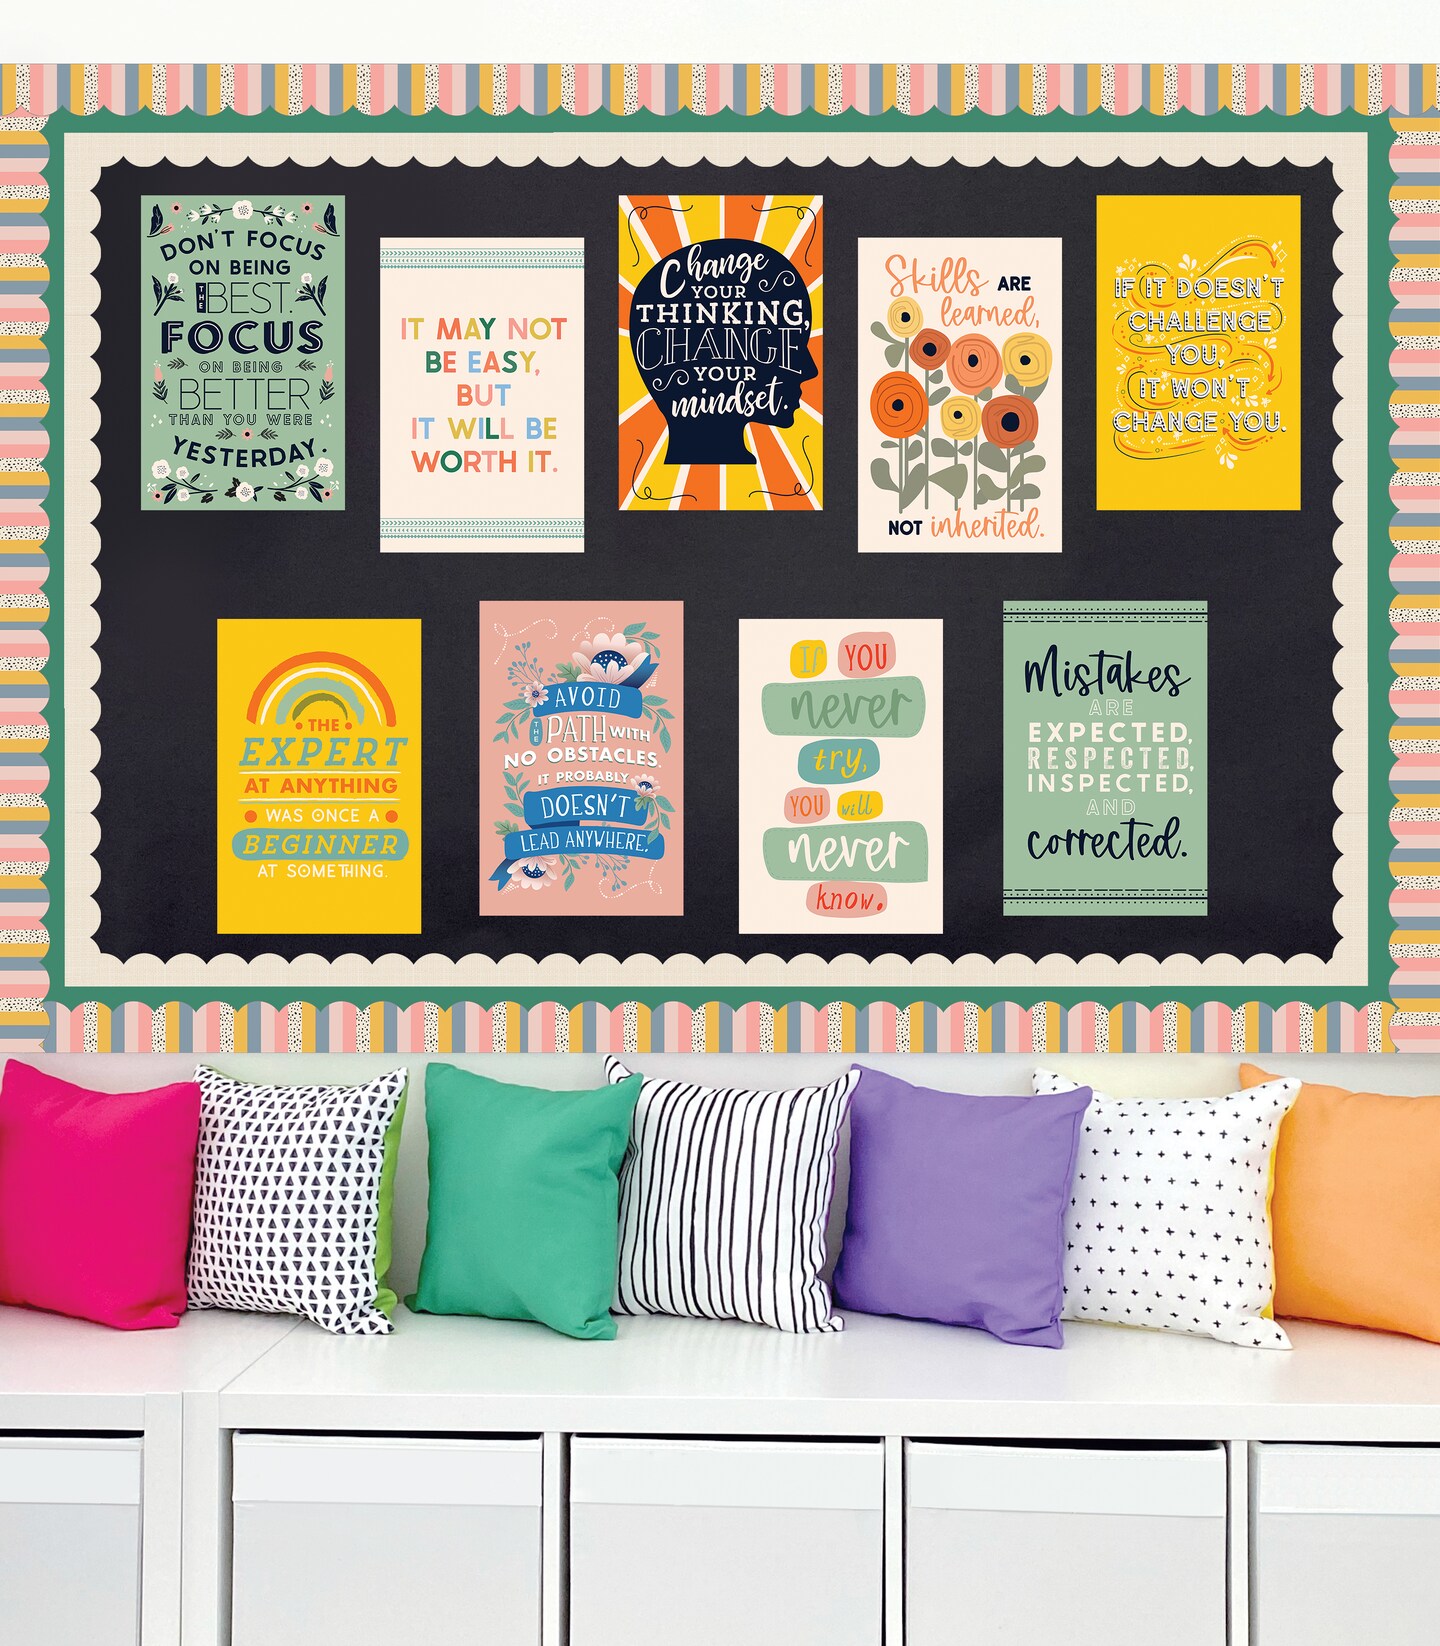 Carson Dellosa 11&#x22; x 17&#x22; Motivational Poster Set, 16 Colorful Classroom Posters With Inspirational Quotes, Inspirational Wall Art for Bulletin Board, Classroom Decor, Wall Decor, and Office Decor